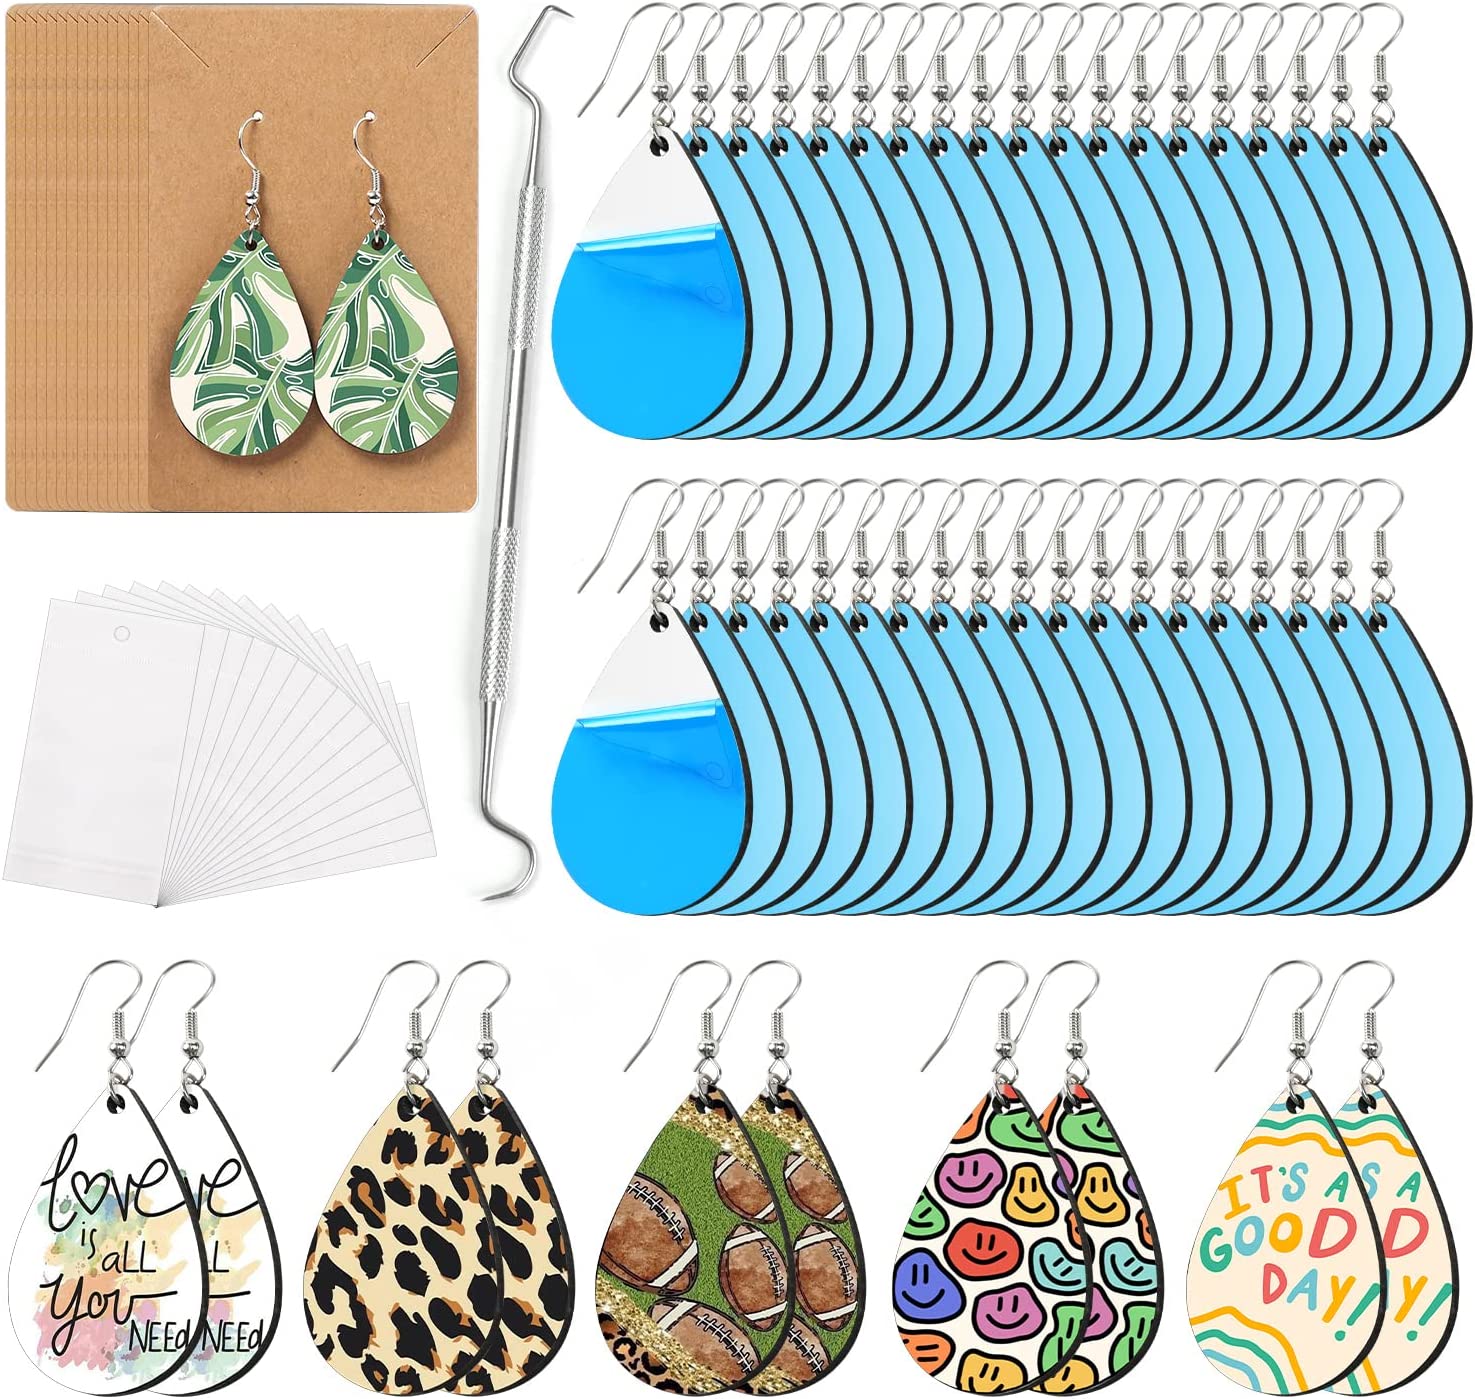  120Pcs Sublimation Blanks Products, Sublimation Earring Blanks  with Earring Hooks and Jump Rings Heat Transfer Earring Pendant for Jewelry  DIY Making Halloween and Christmas Gifts